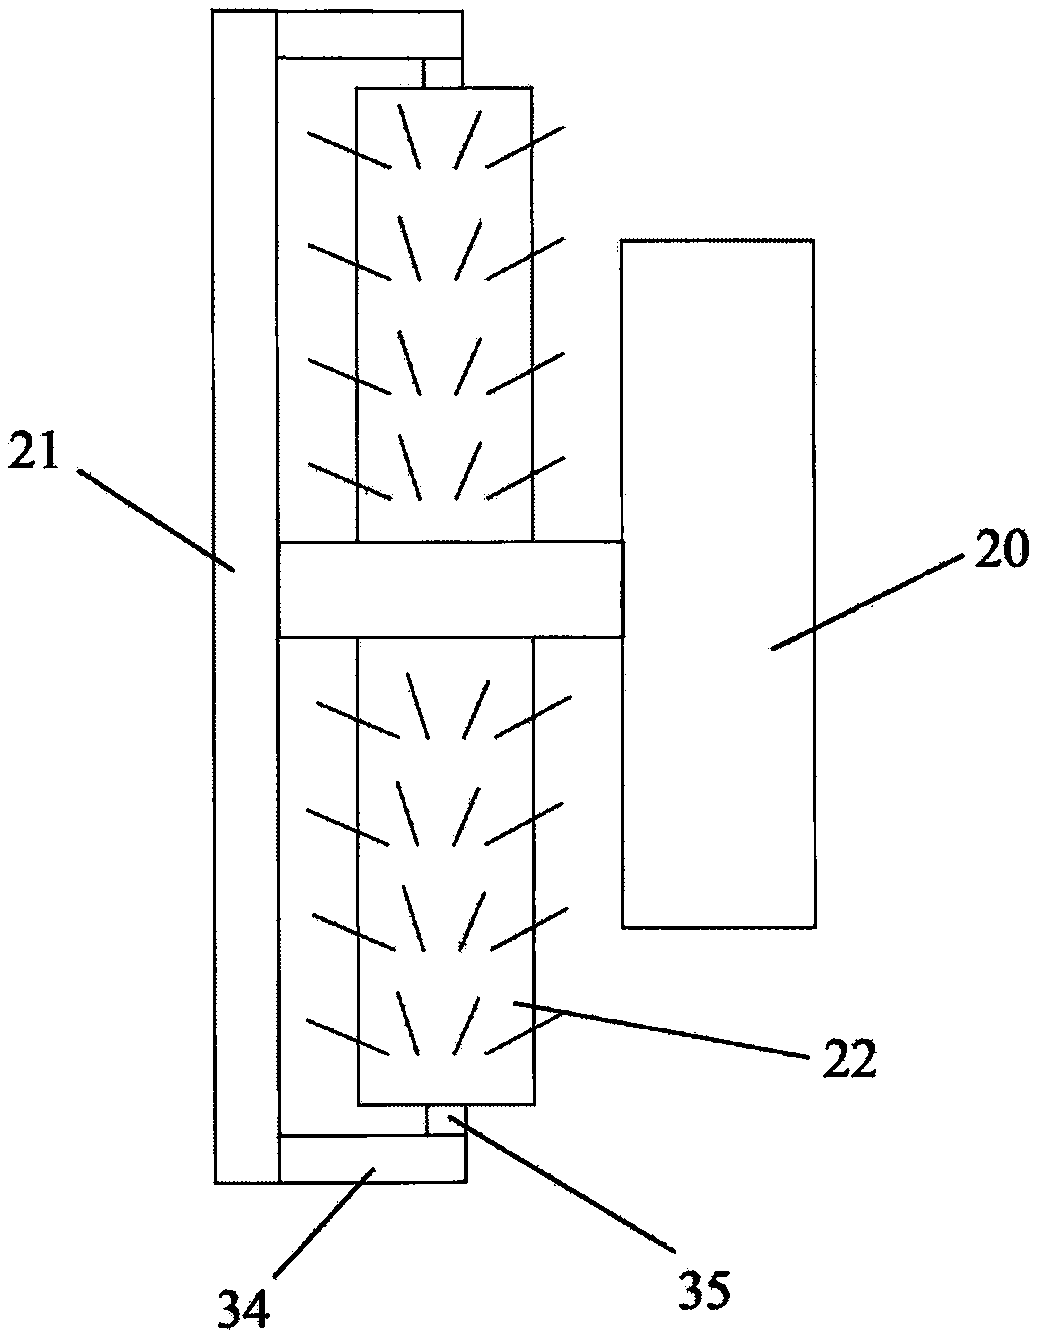 Environment-friendly solid-liquid separation device